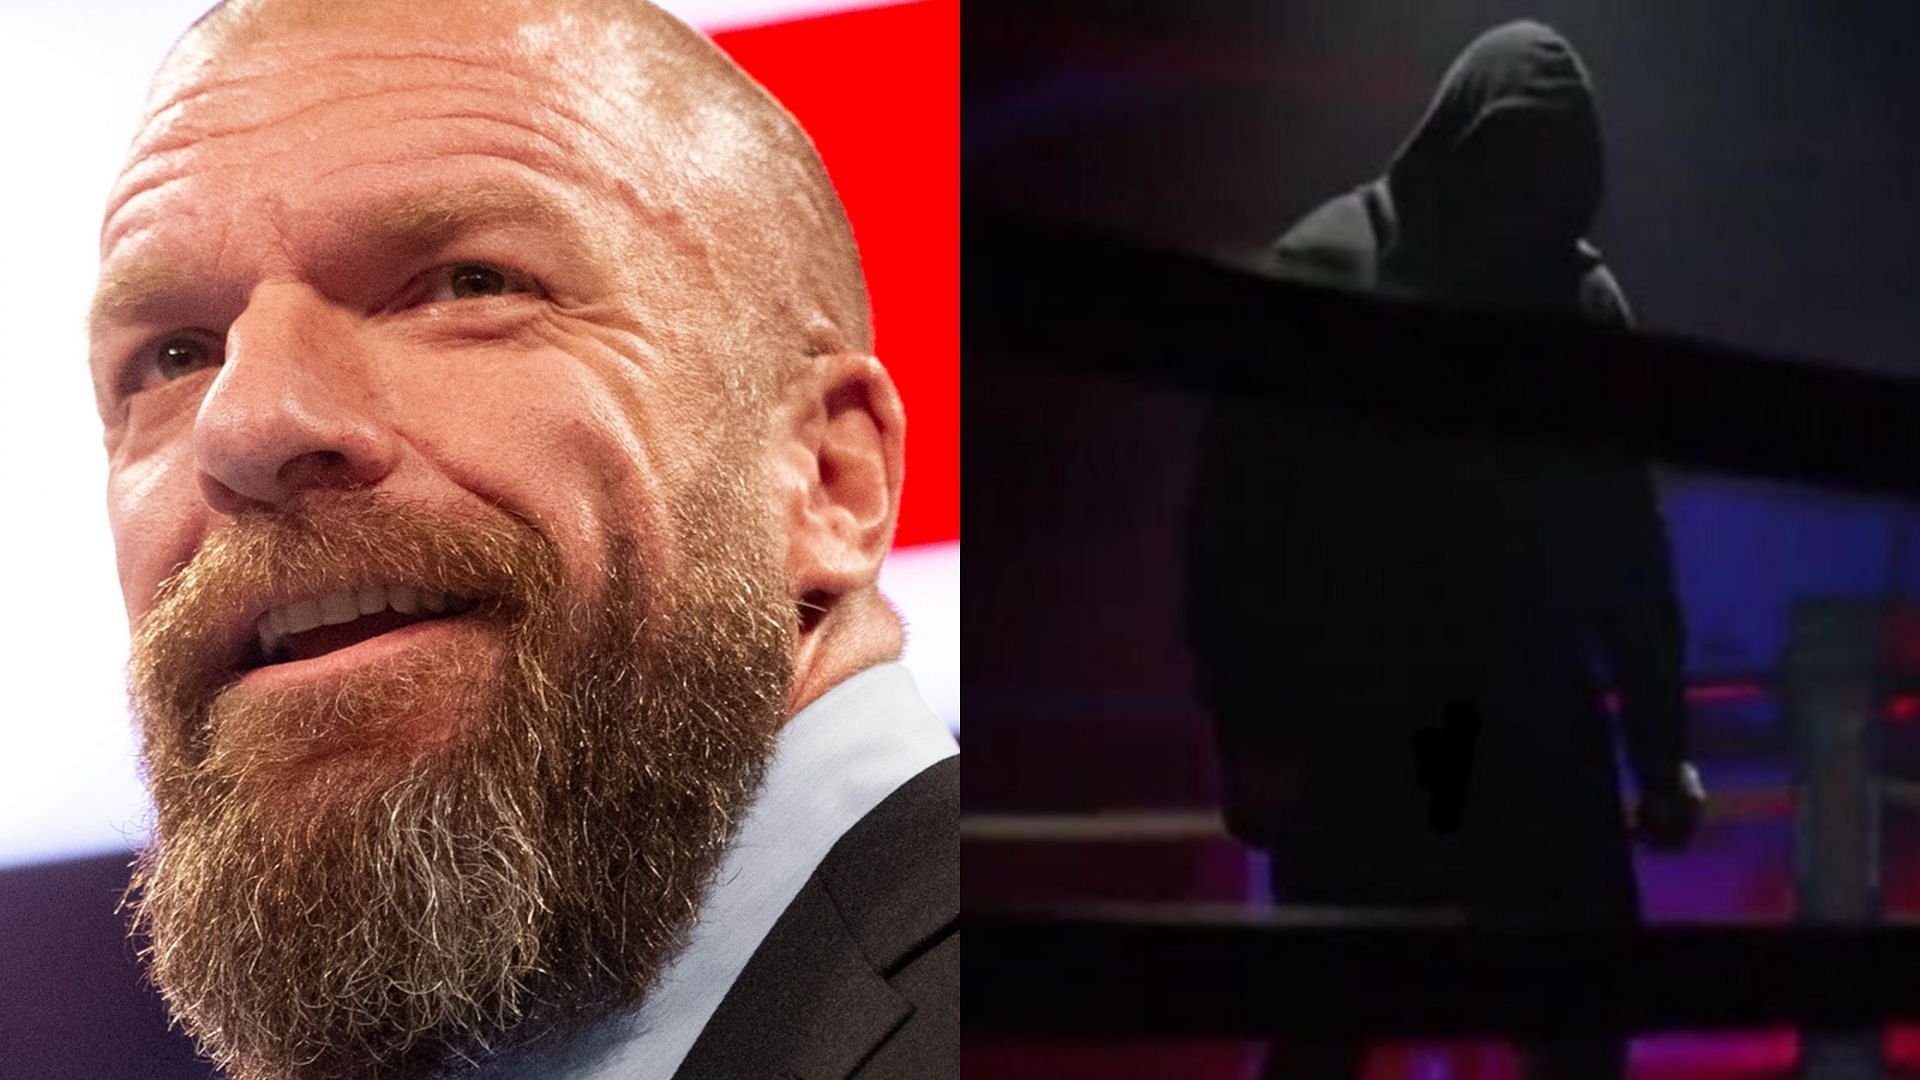 WWE Chief Content Officer Triple H (left) and Jon Moxley (right)